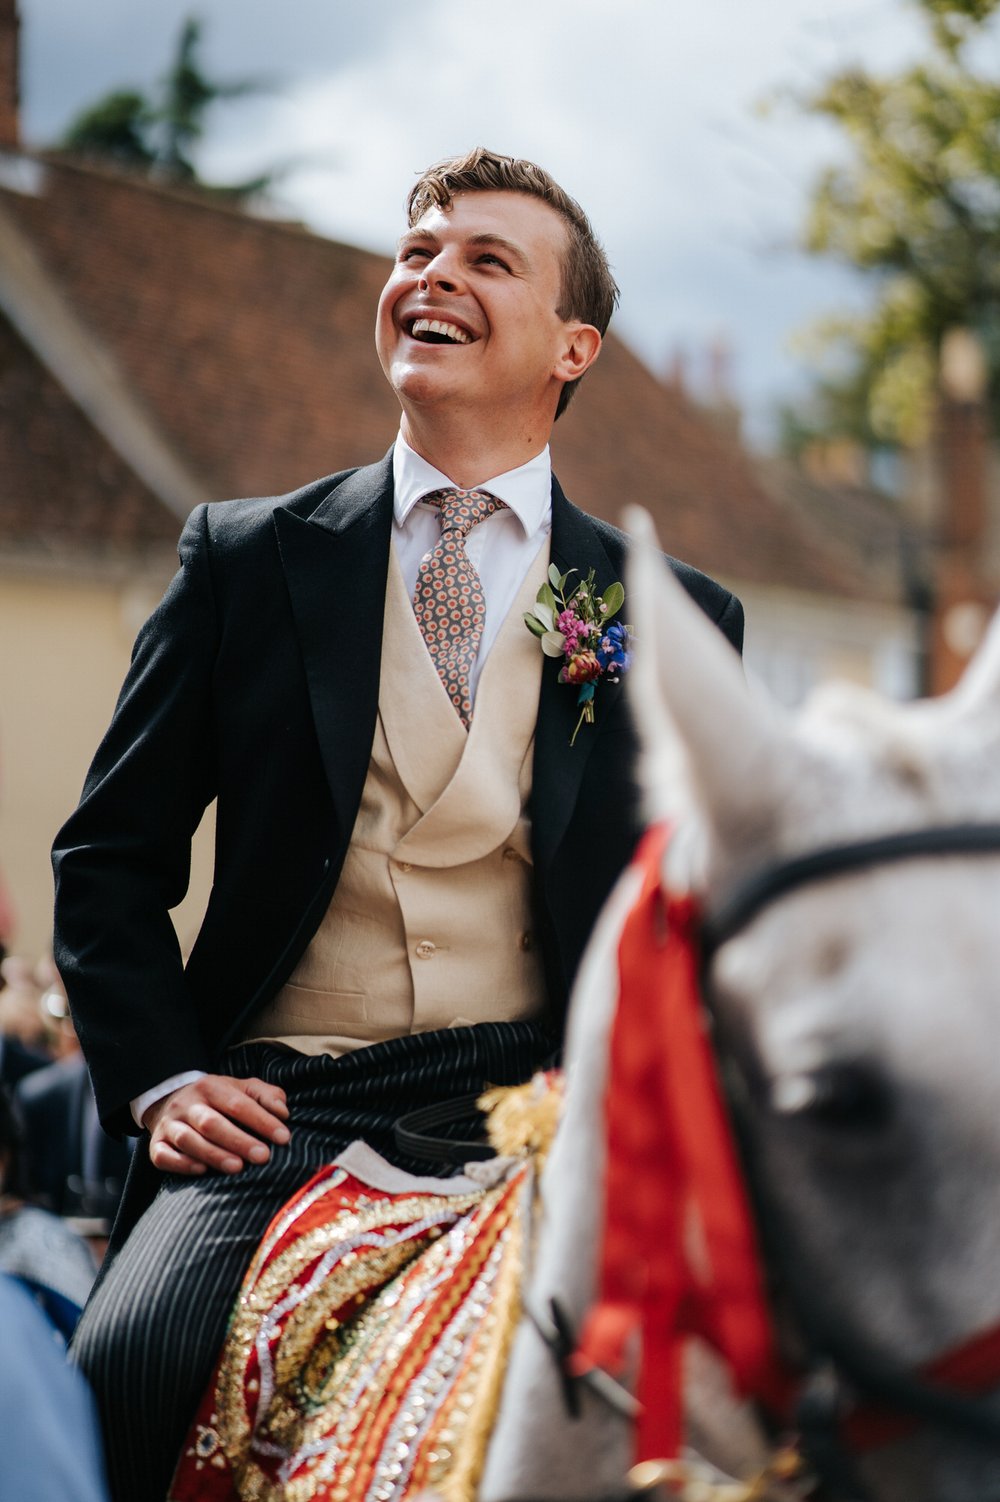 Groom is joyful and excited as he sits on lavishly decorated horse during wedding day baraat